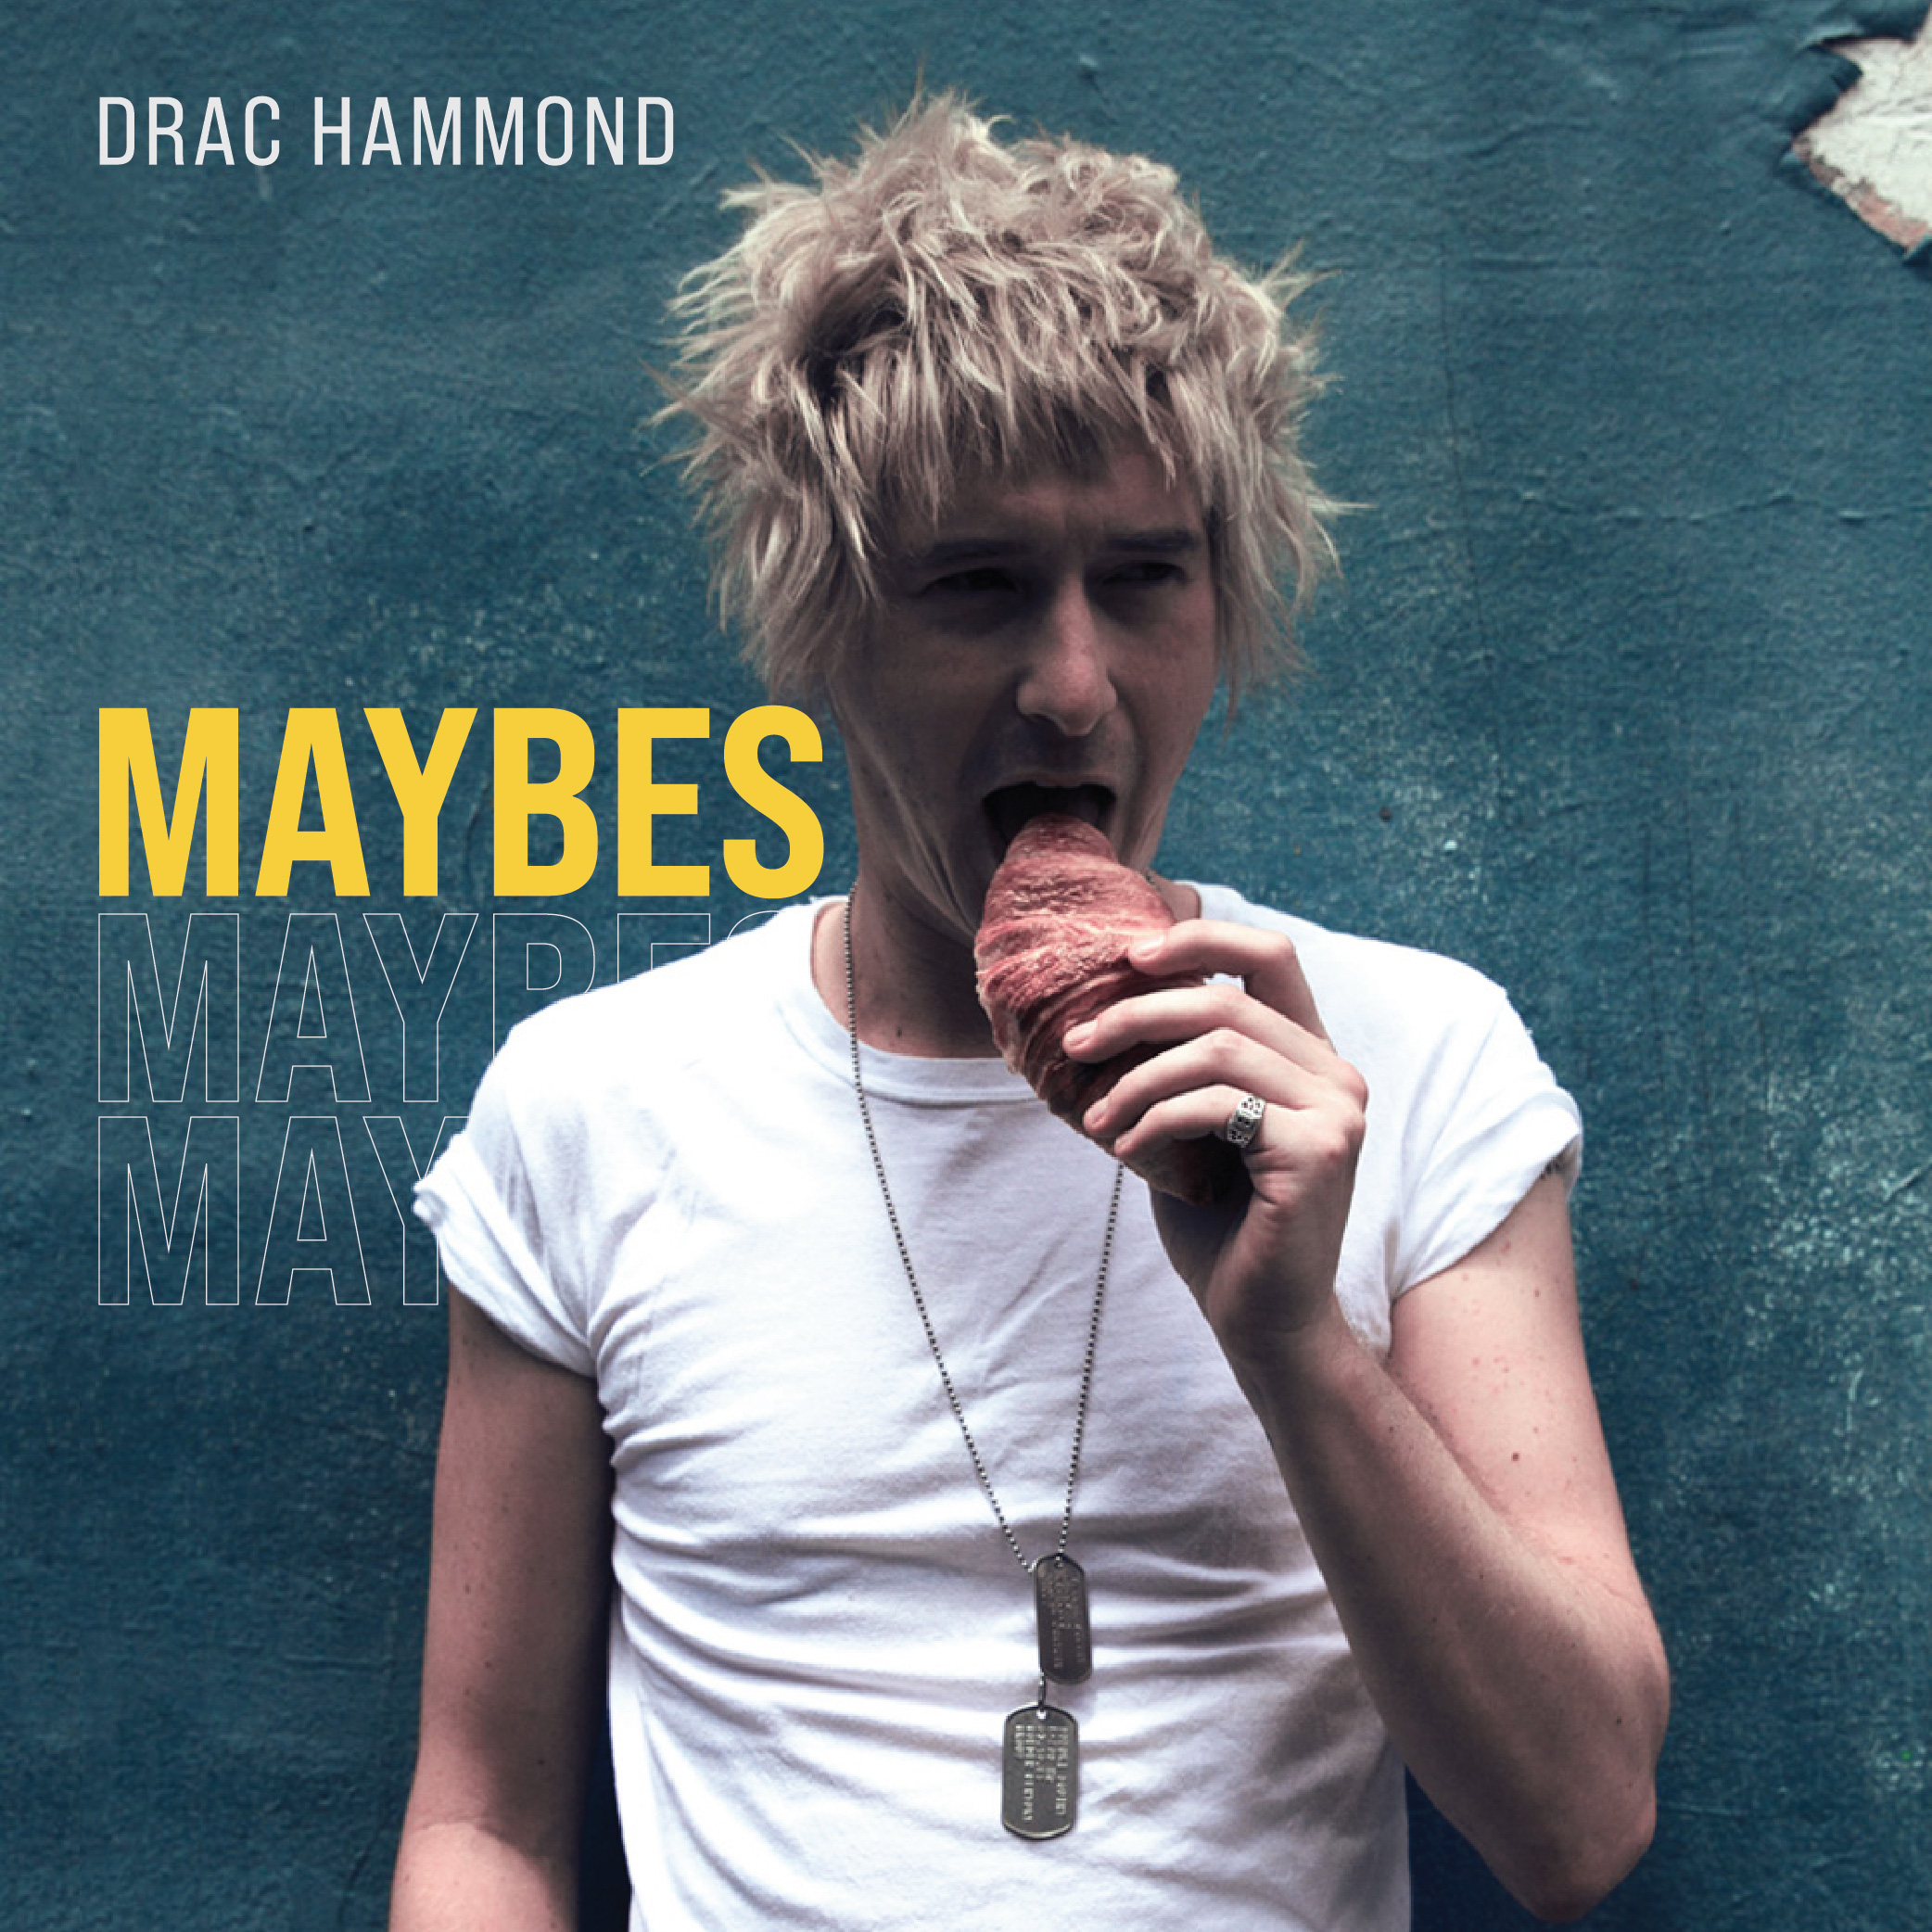 Art for Maybes by Drac Hammond